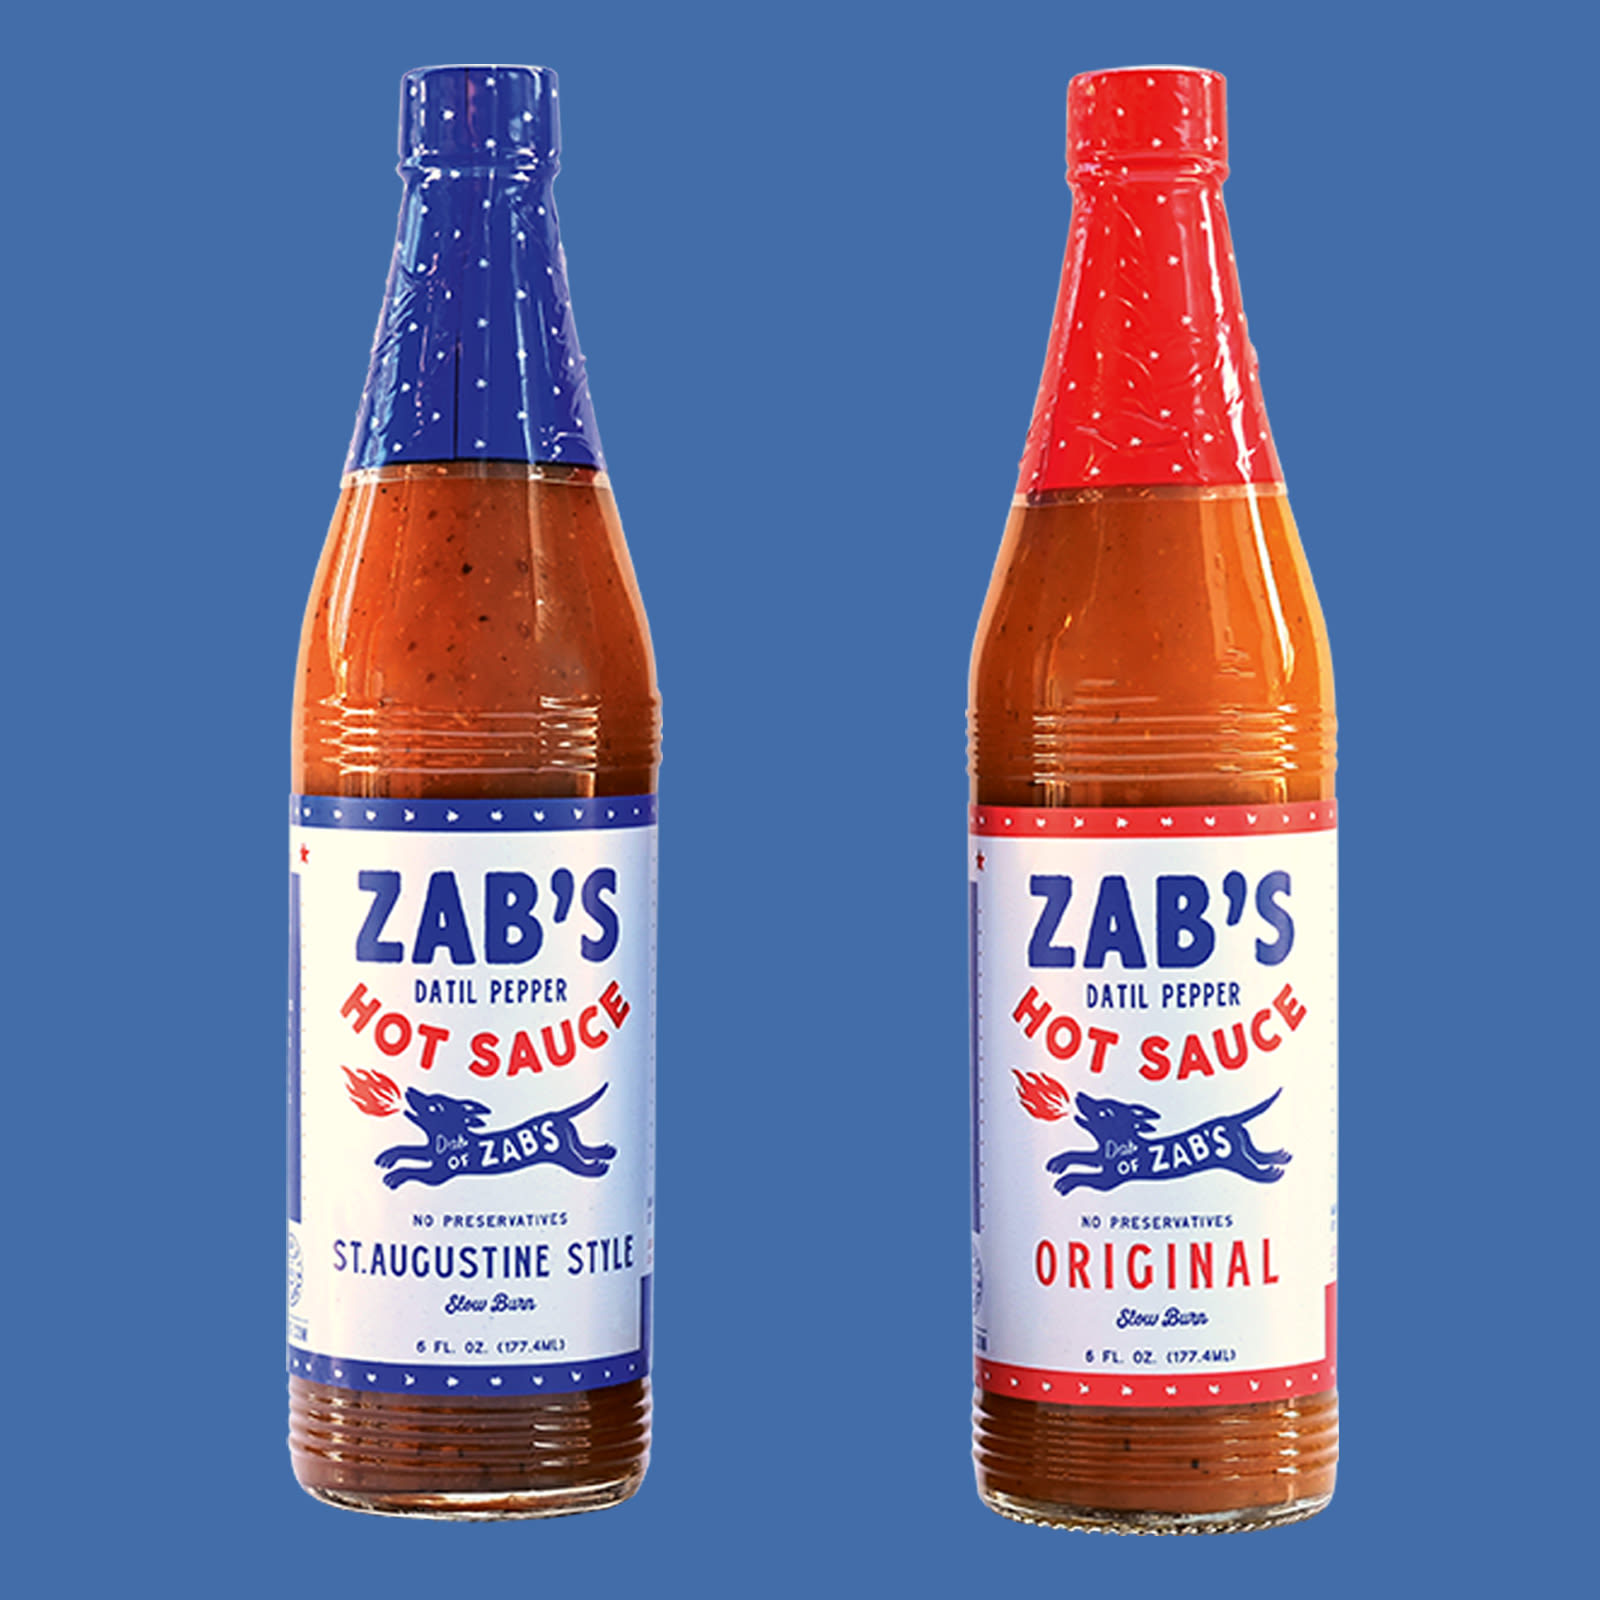 The making of Zab's Hot Sauce